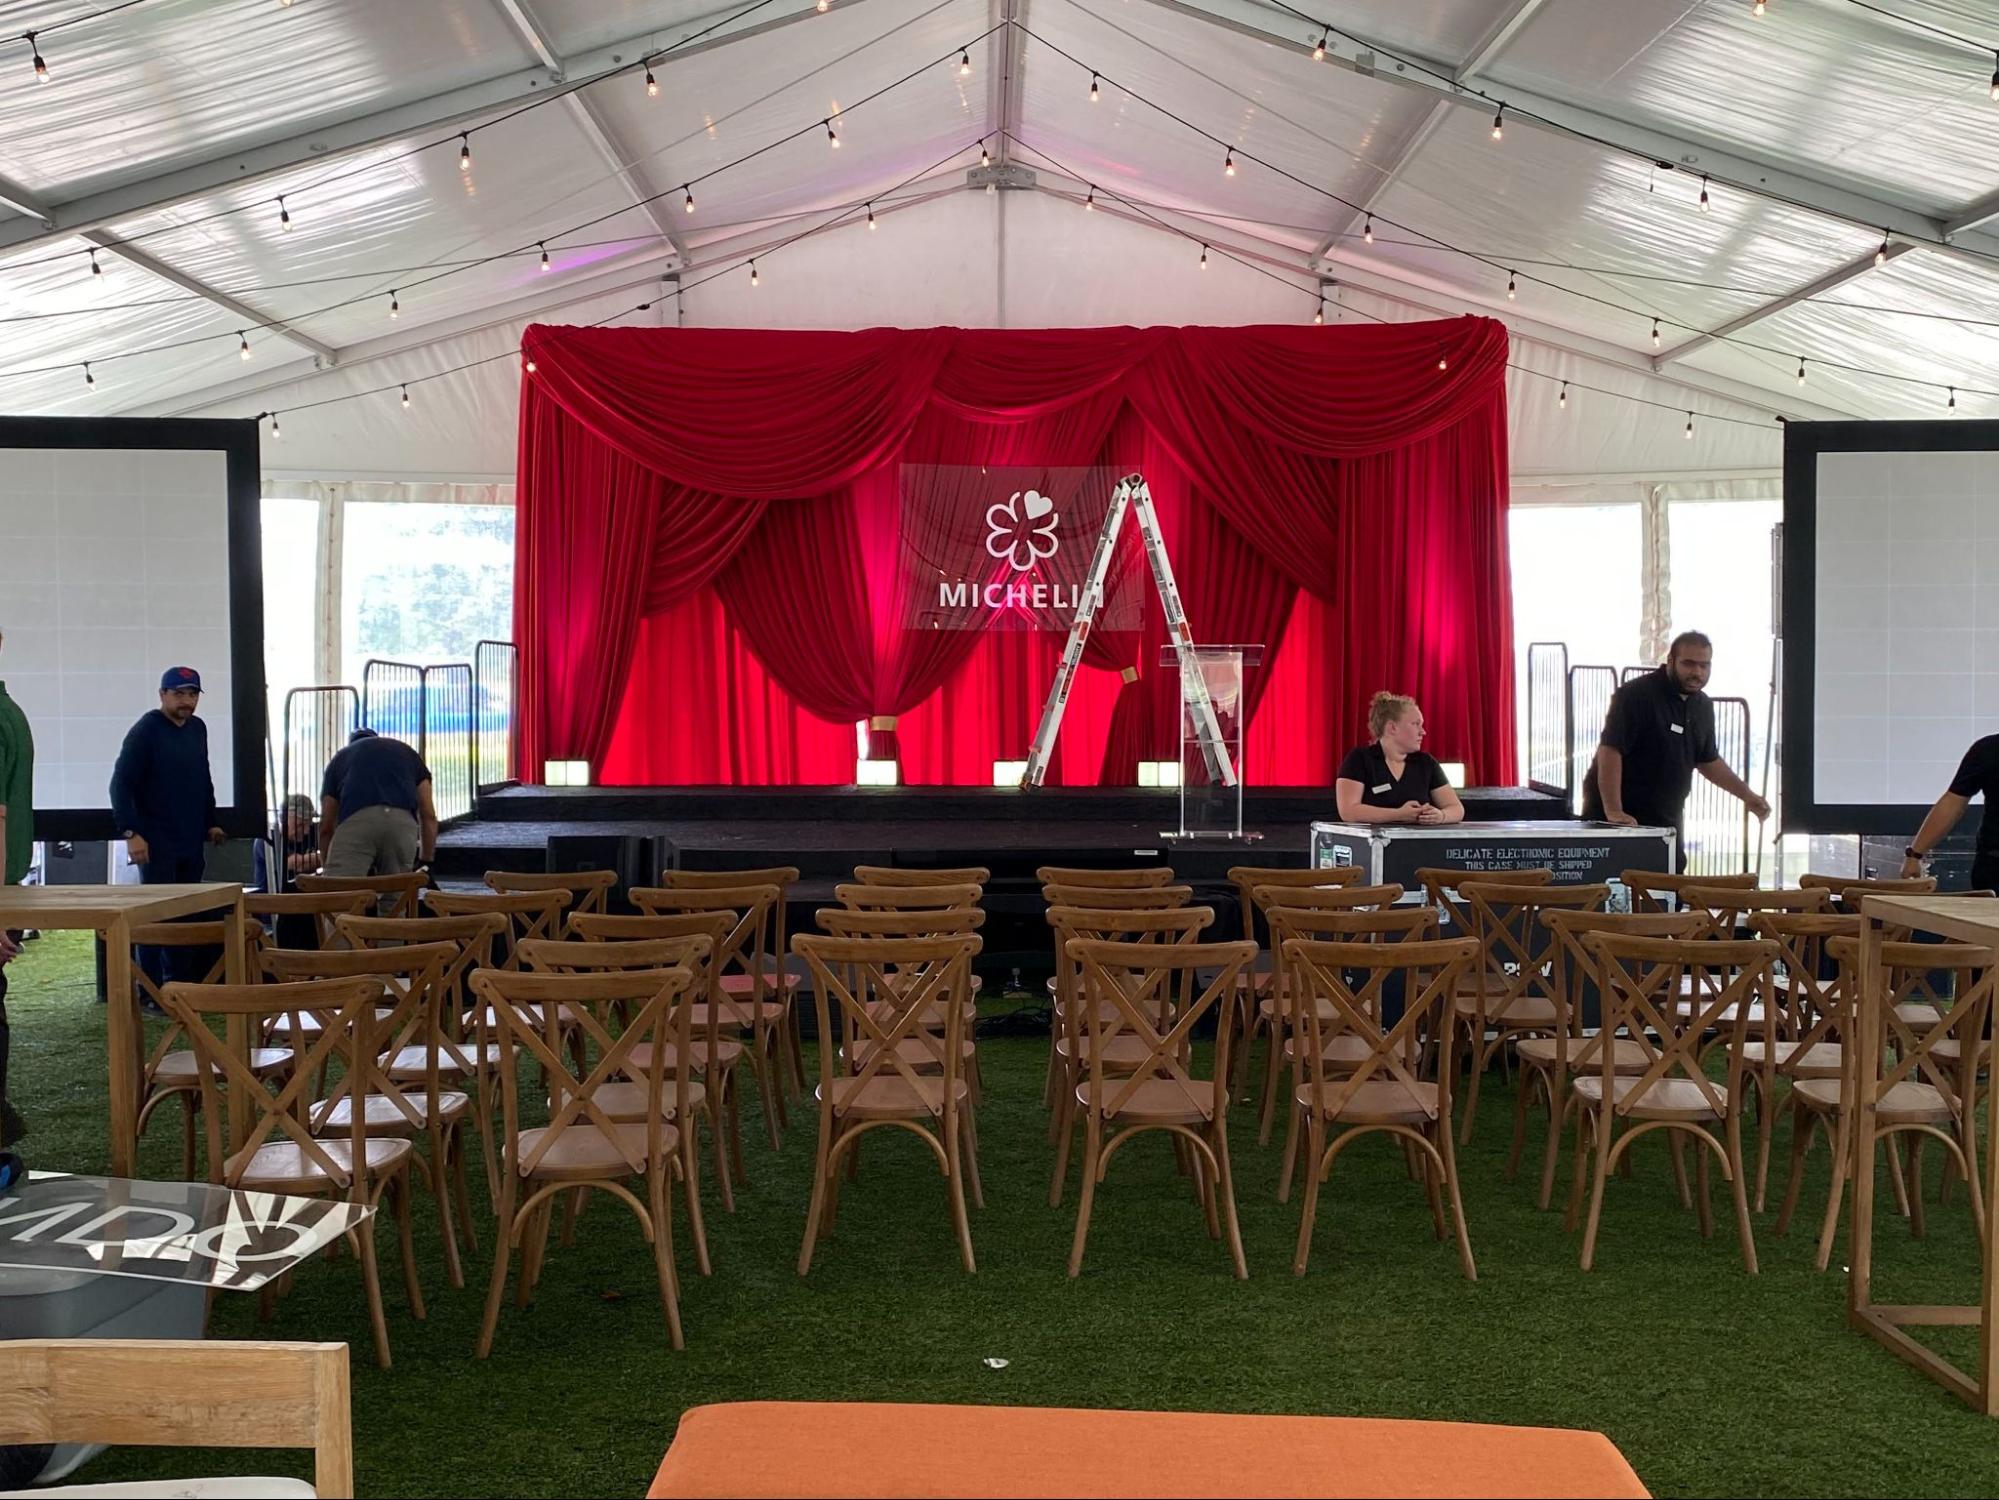 the stage set up for the Michelin Star event at the Ritz Carlton in Orlando, Florida under an event tent provided by iRentEverything